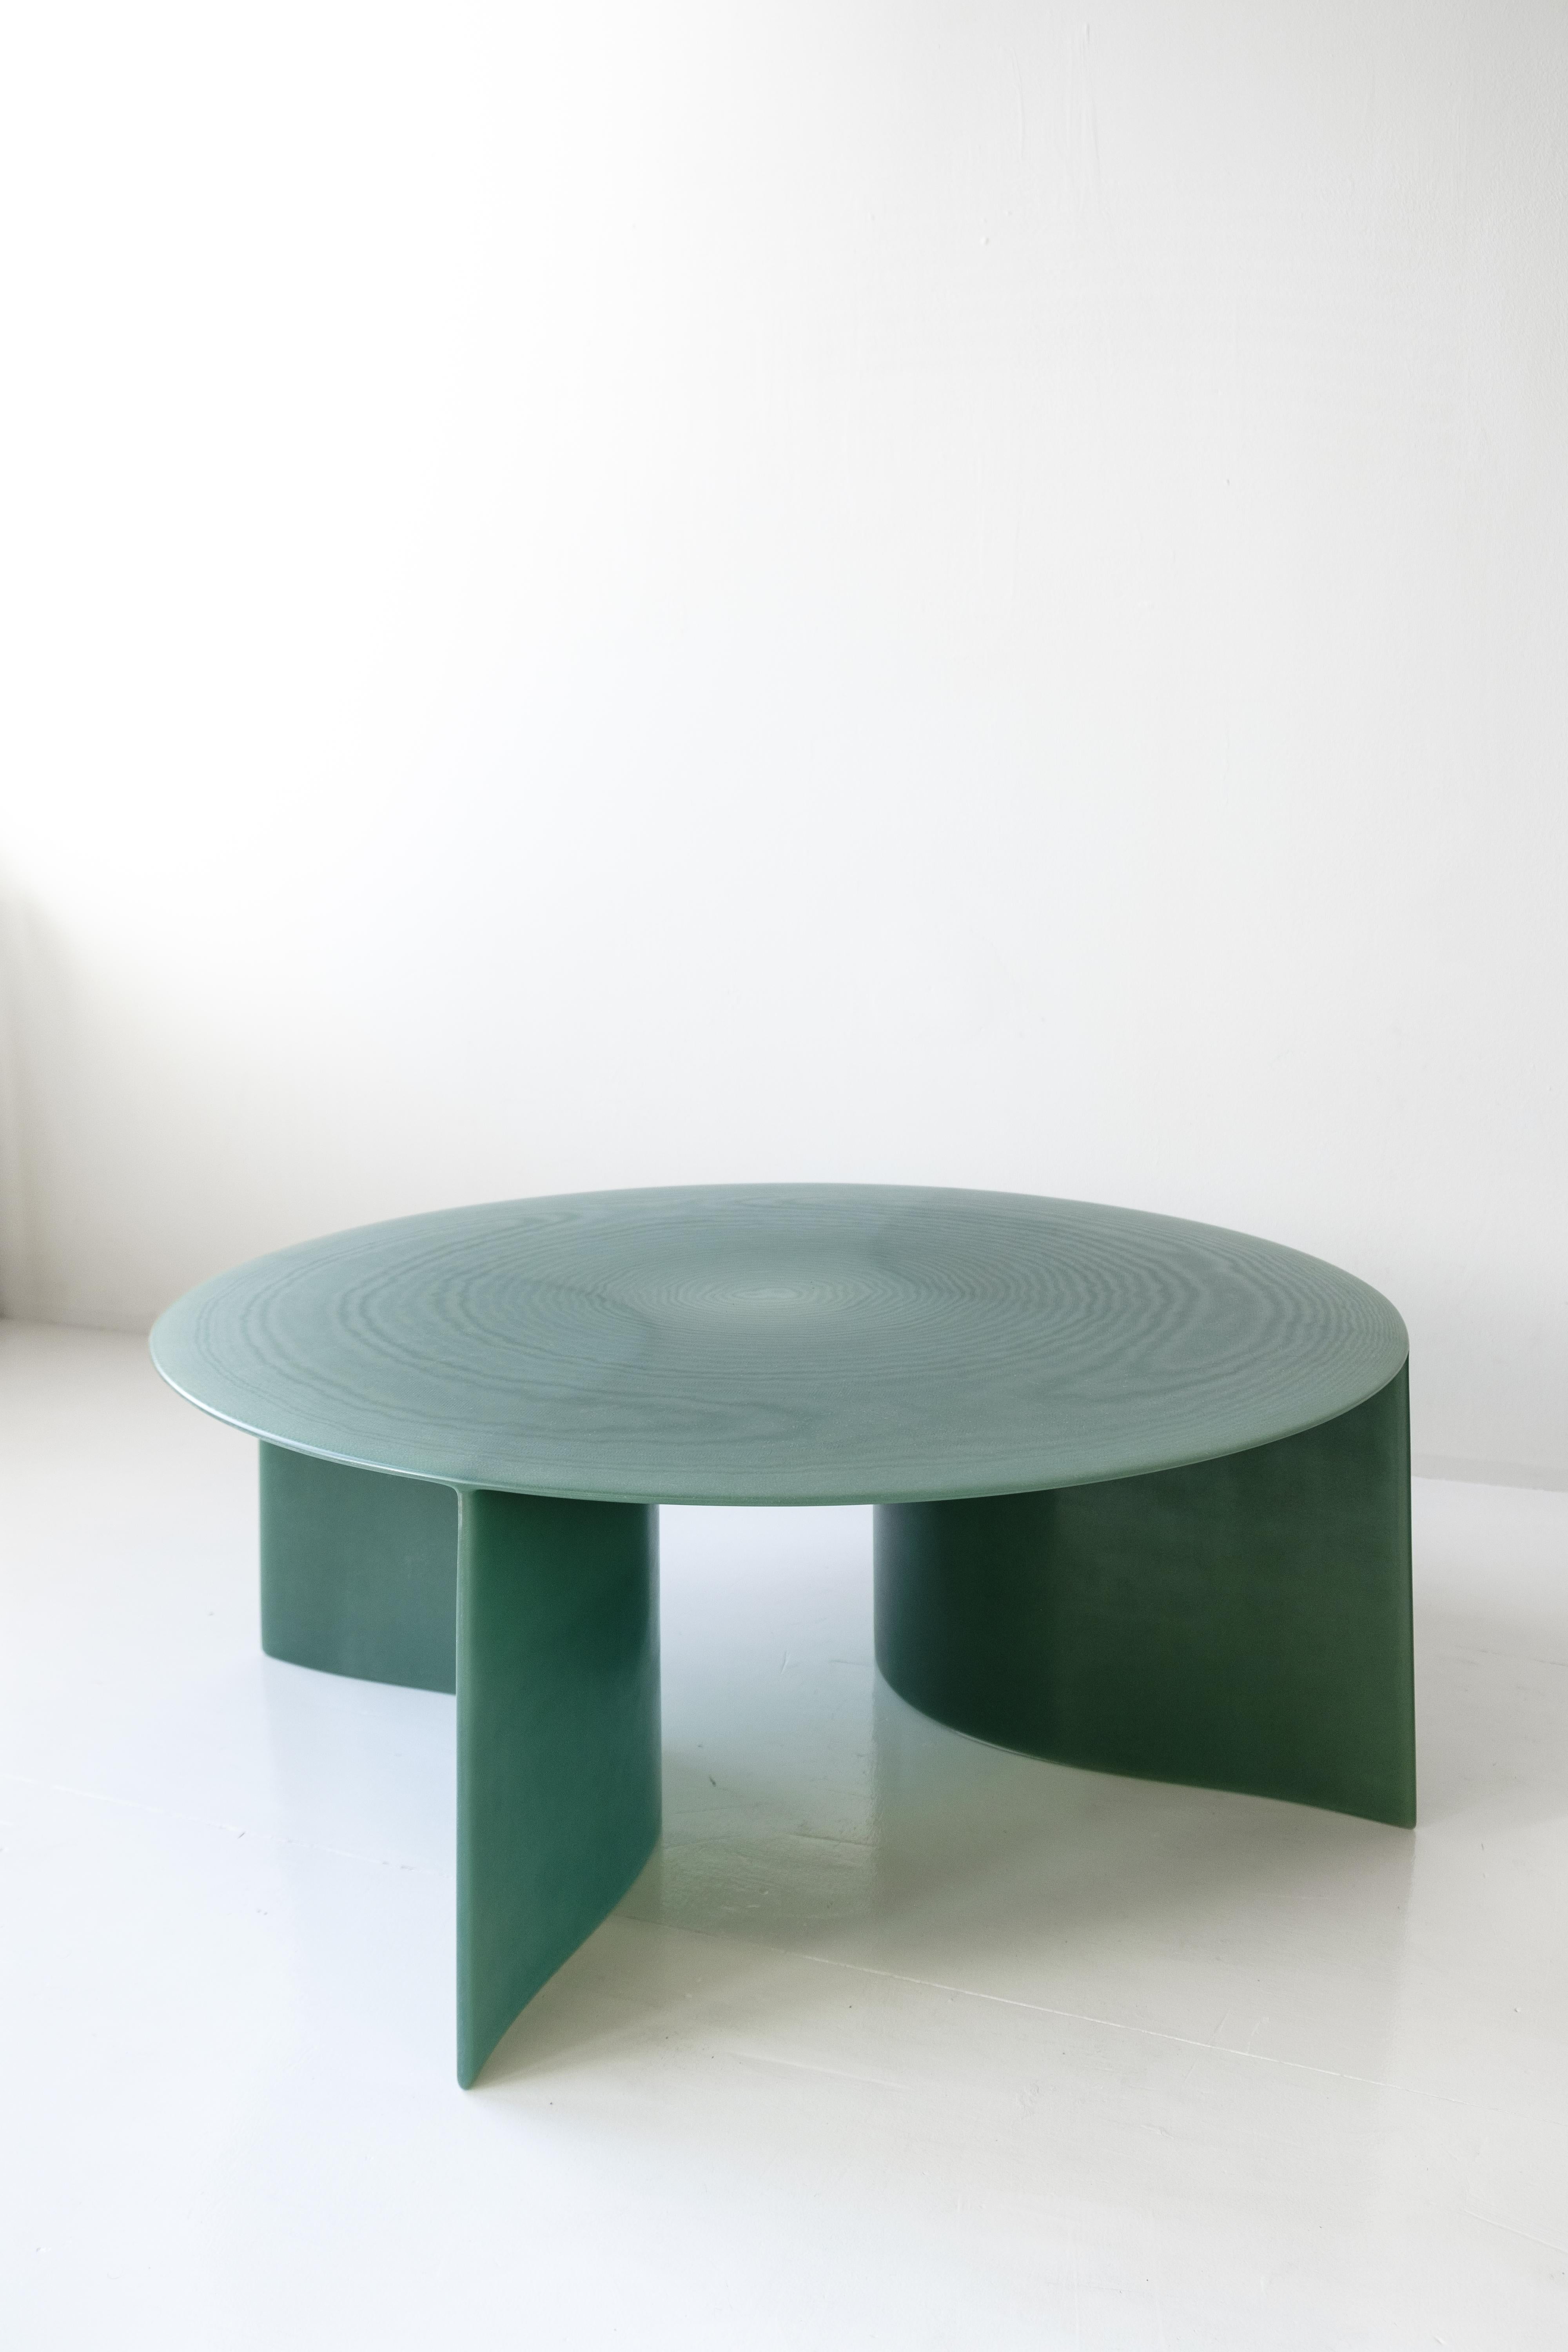 Contemporary Green Fiberglass, New Wave Coffee Table Round 120cm, by Lukas Cober 7